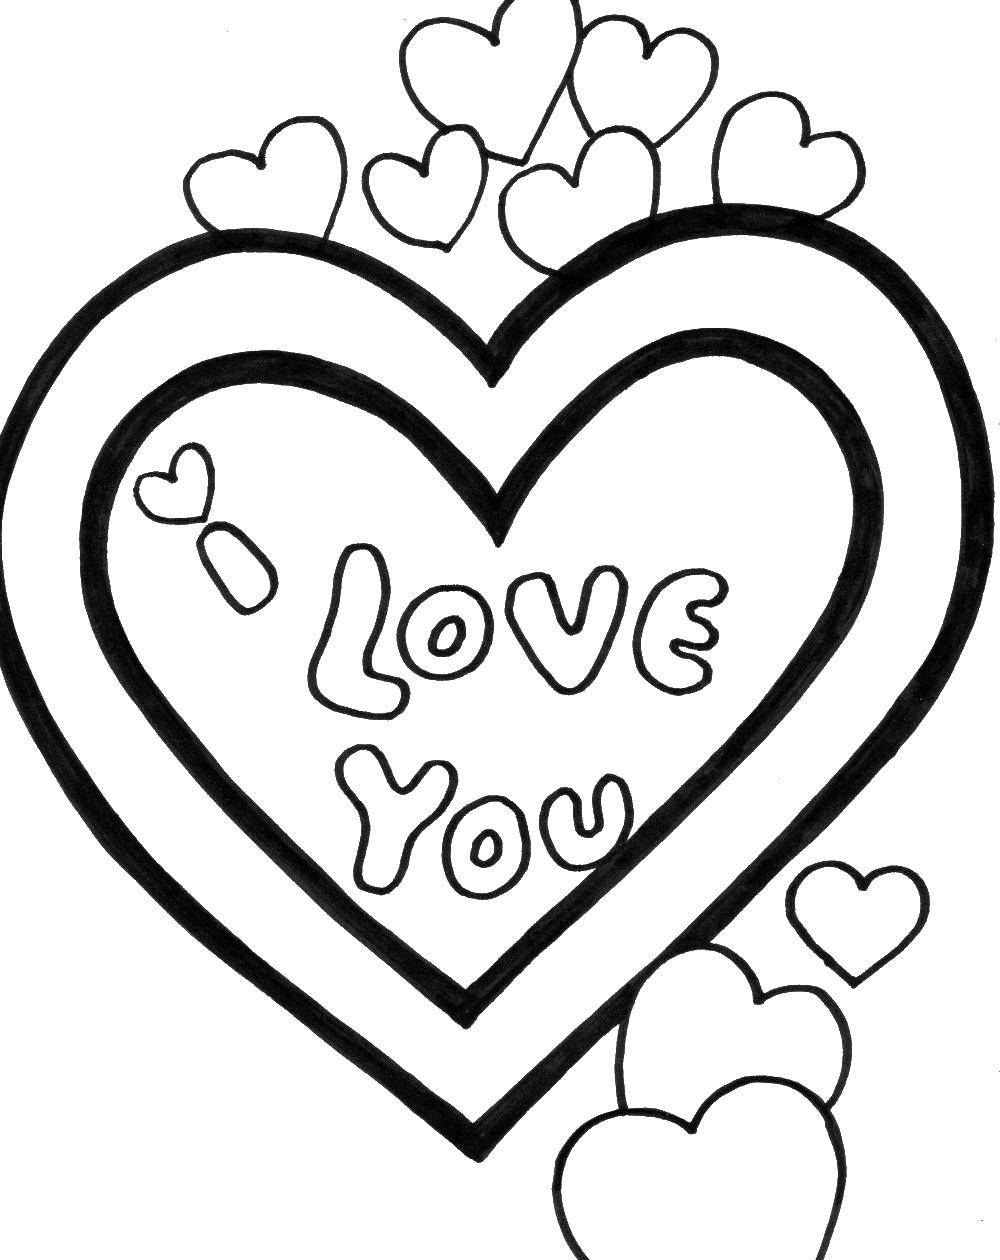 Coloring I love you!. Category I love you. Tags:  Recognition, love, heart.